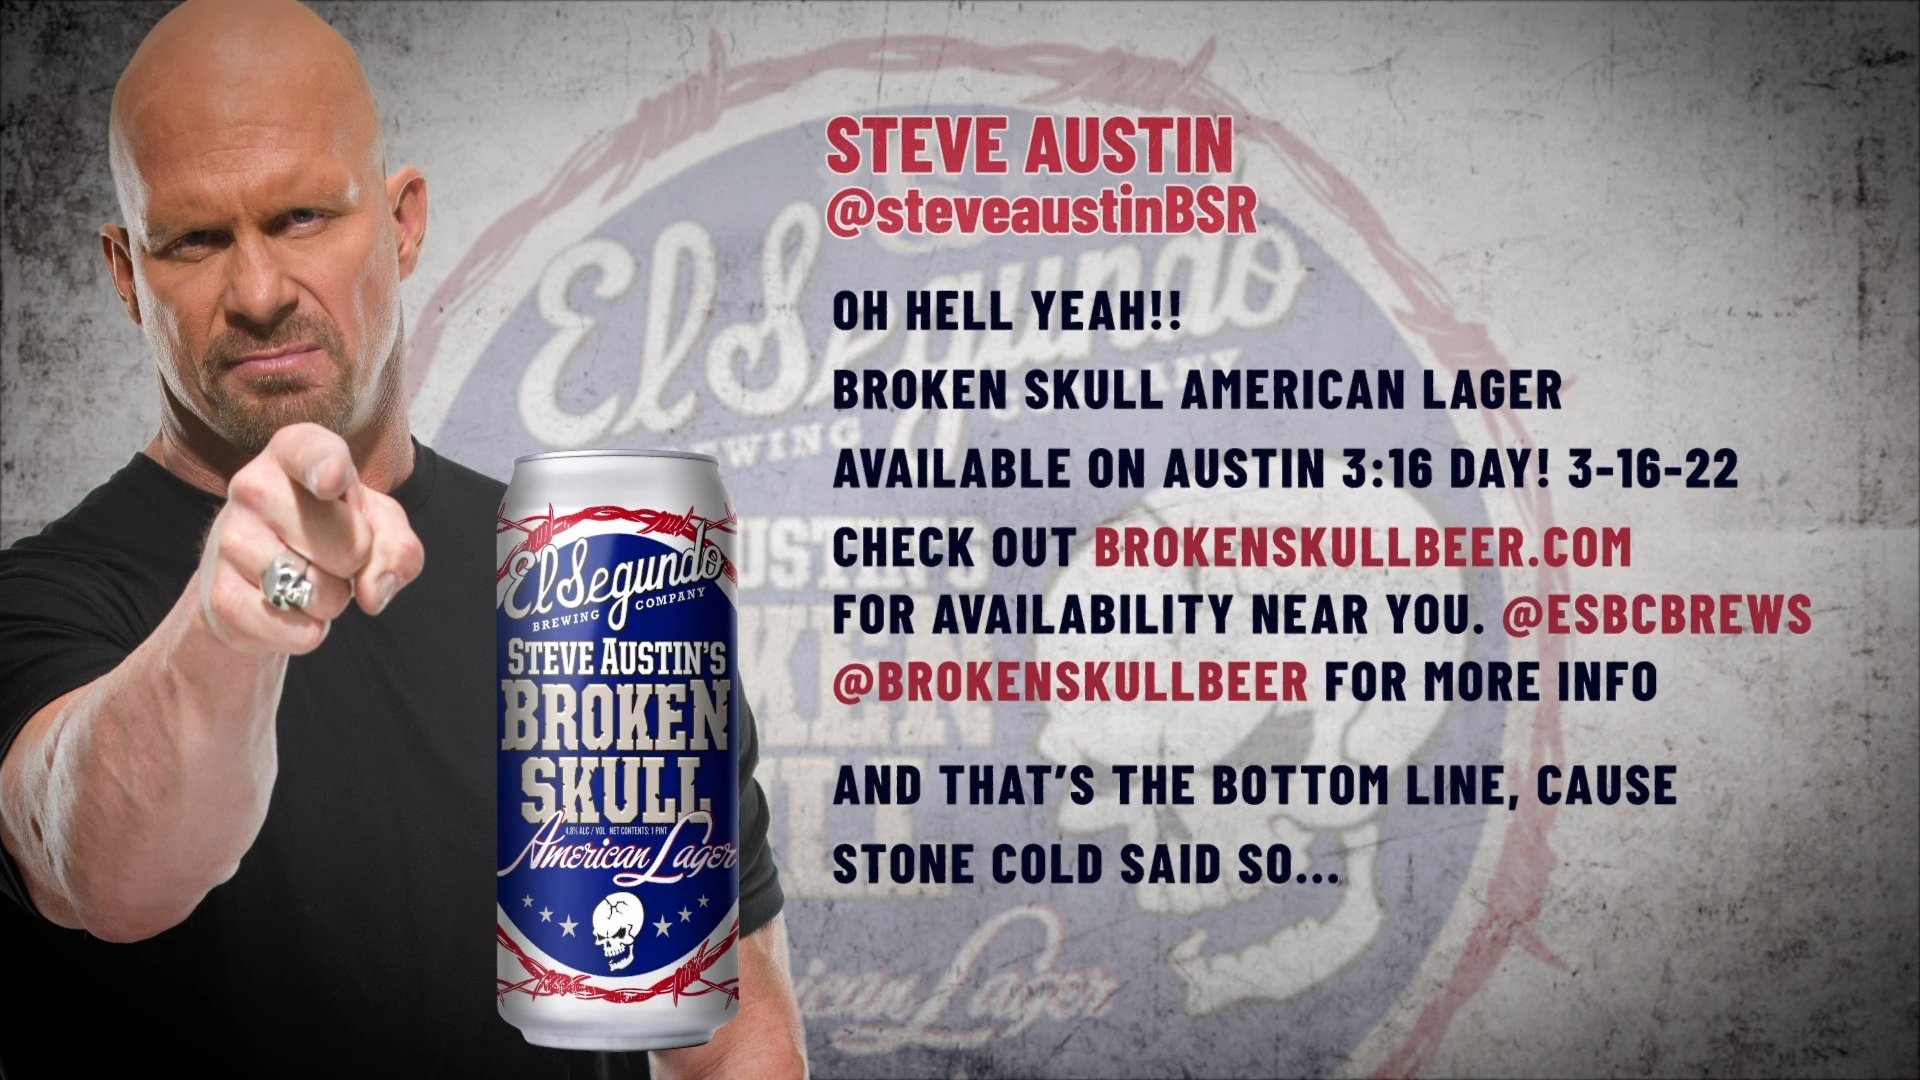 Stone Cold Steve Austin and the WWE Are Celebrating 3:16 Day with El  Segundo Brewing Company - THE BEER THRILLERS